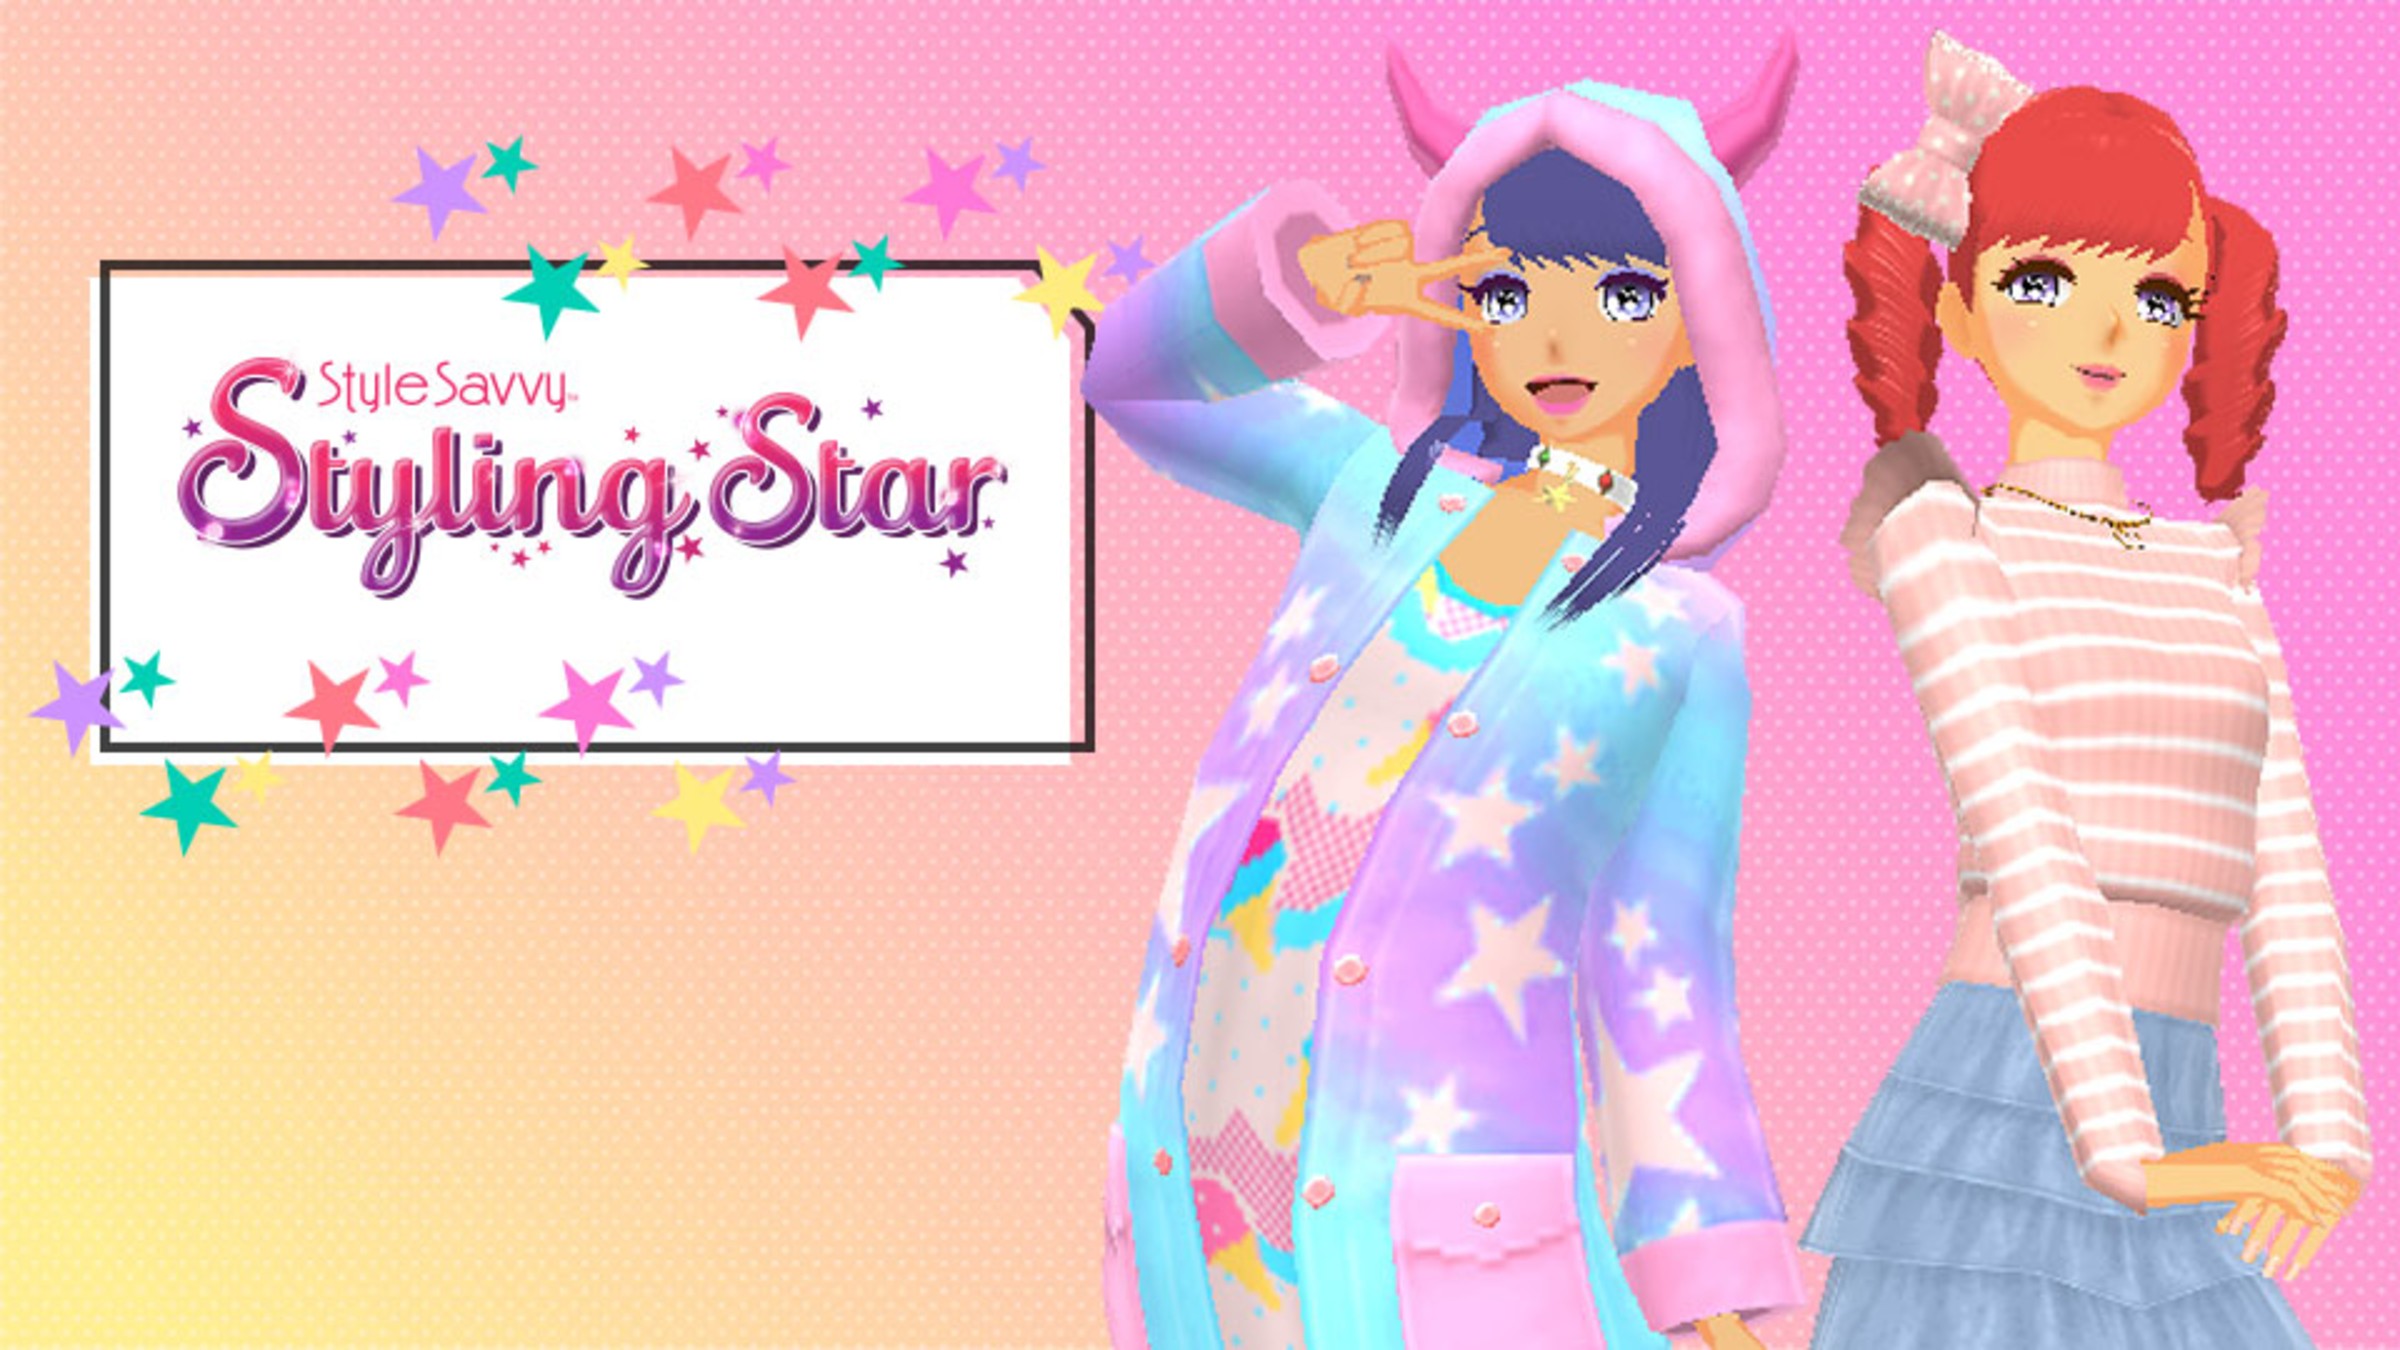 Style Savvy: Styling Star for Nintendo 3DS - Nintendo Official Site